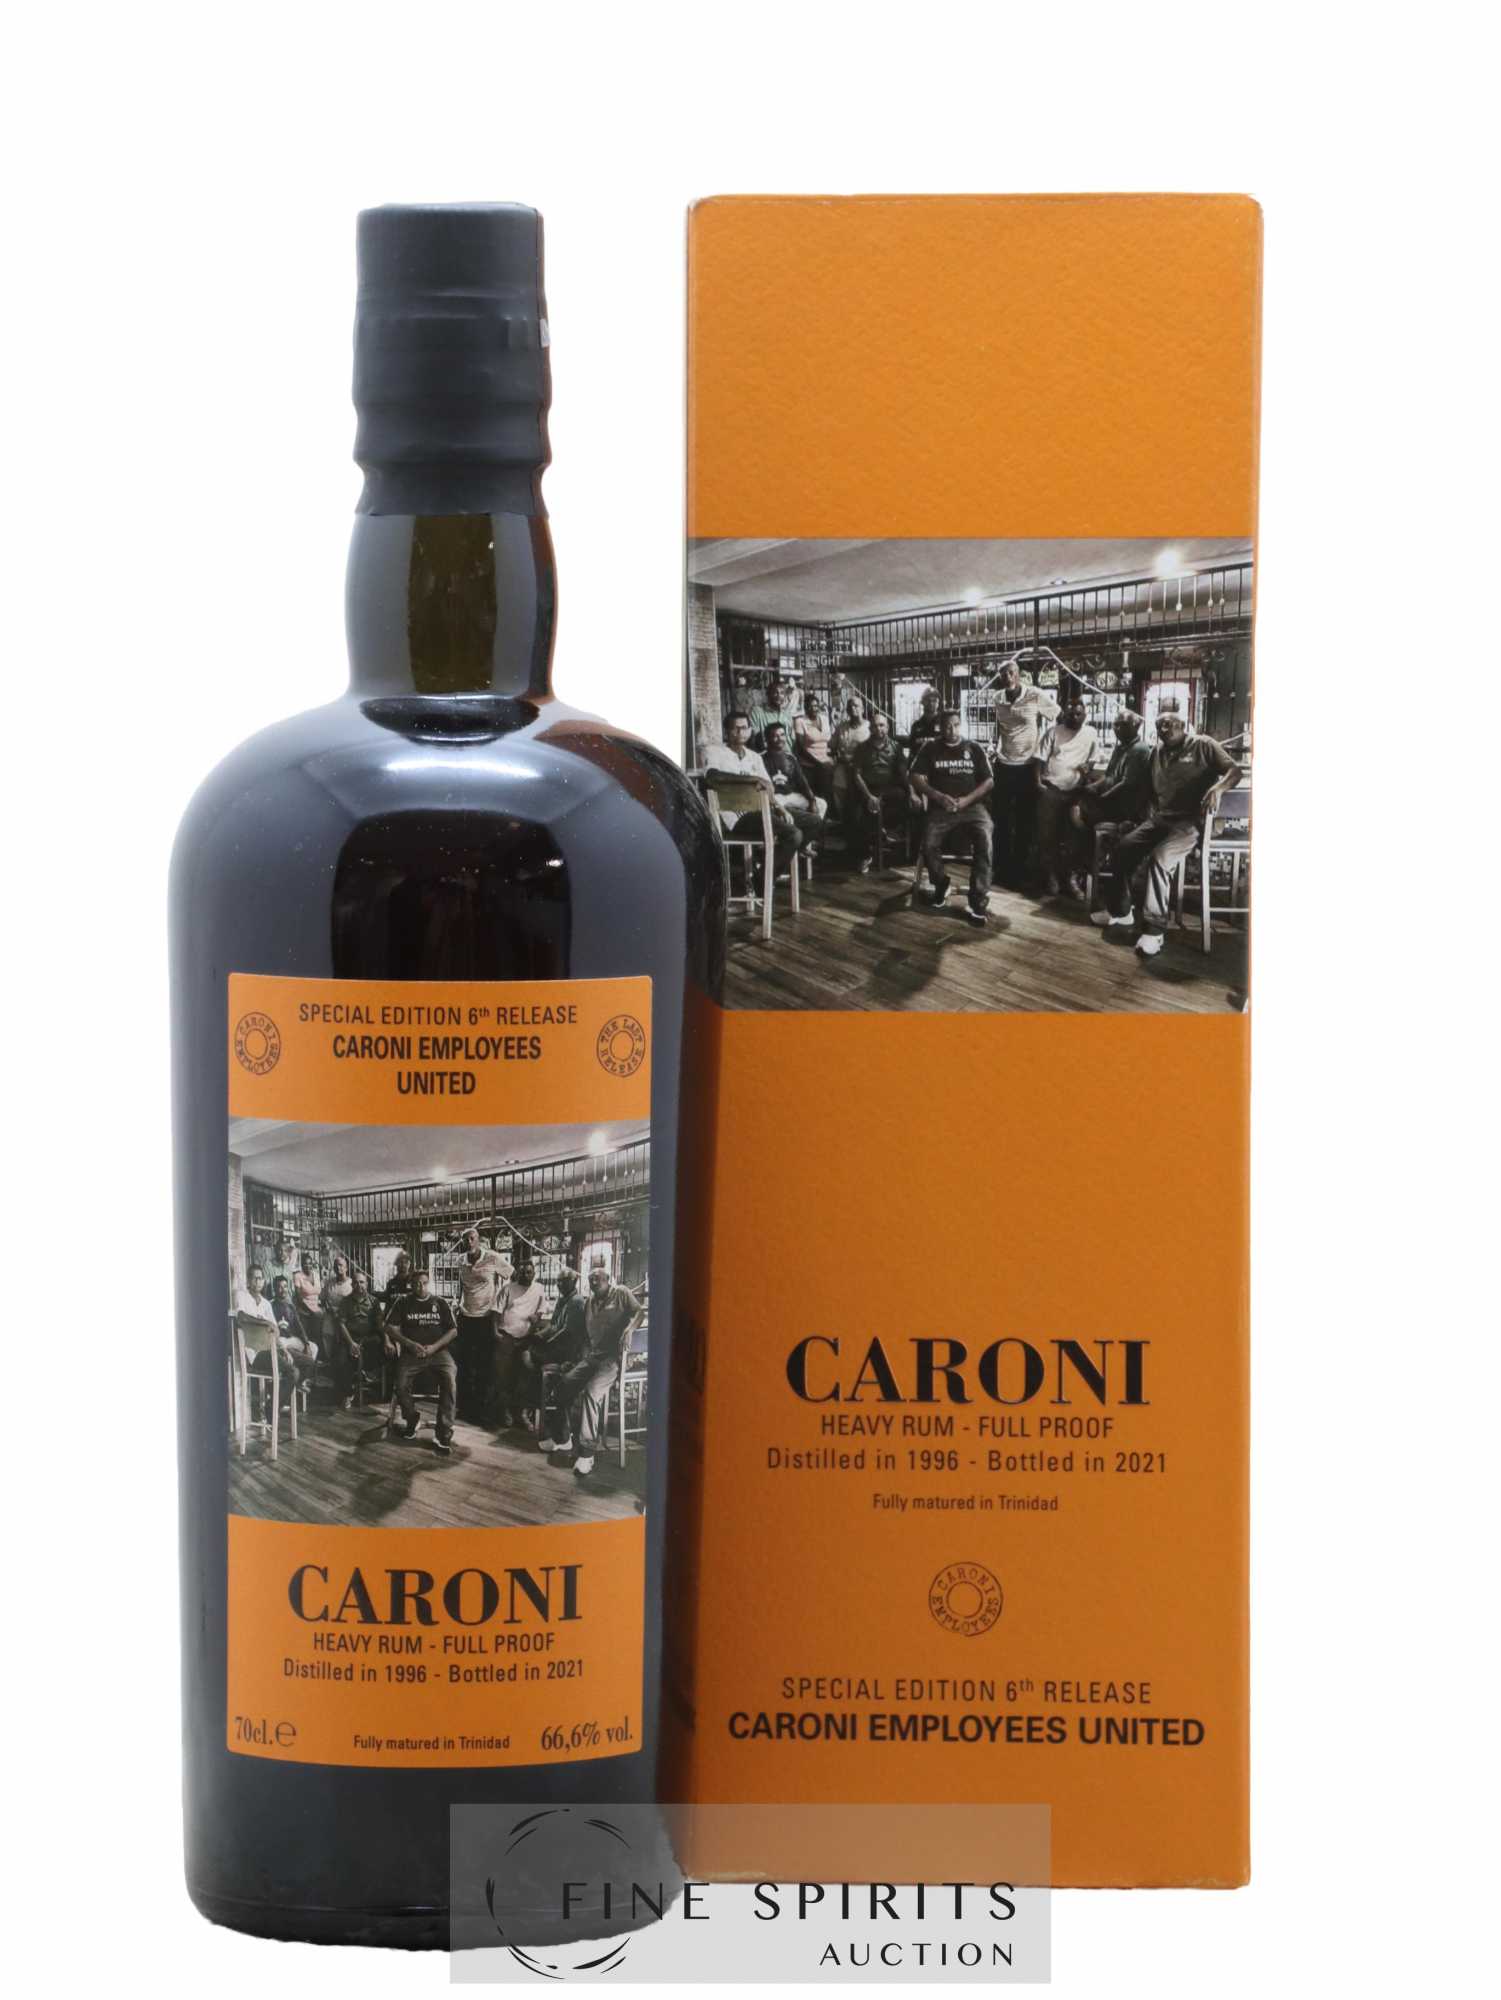 Caroni 1996 Velier Special Edition 6th Release - One of 754 - bottled 2021 Caroni Employees United